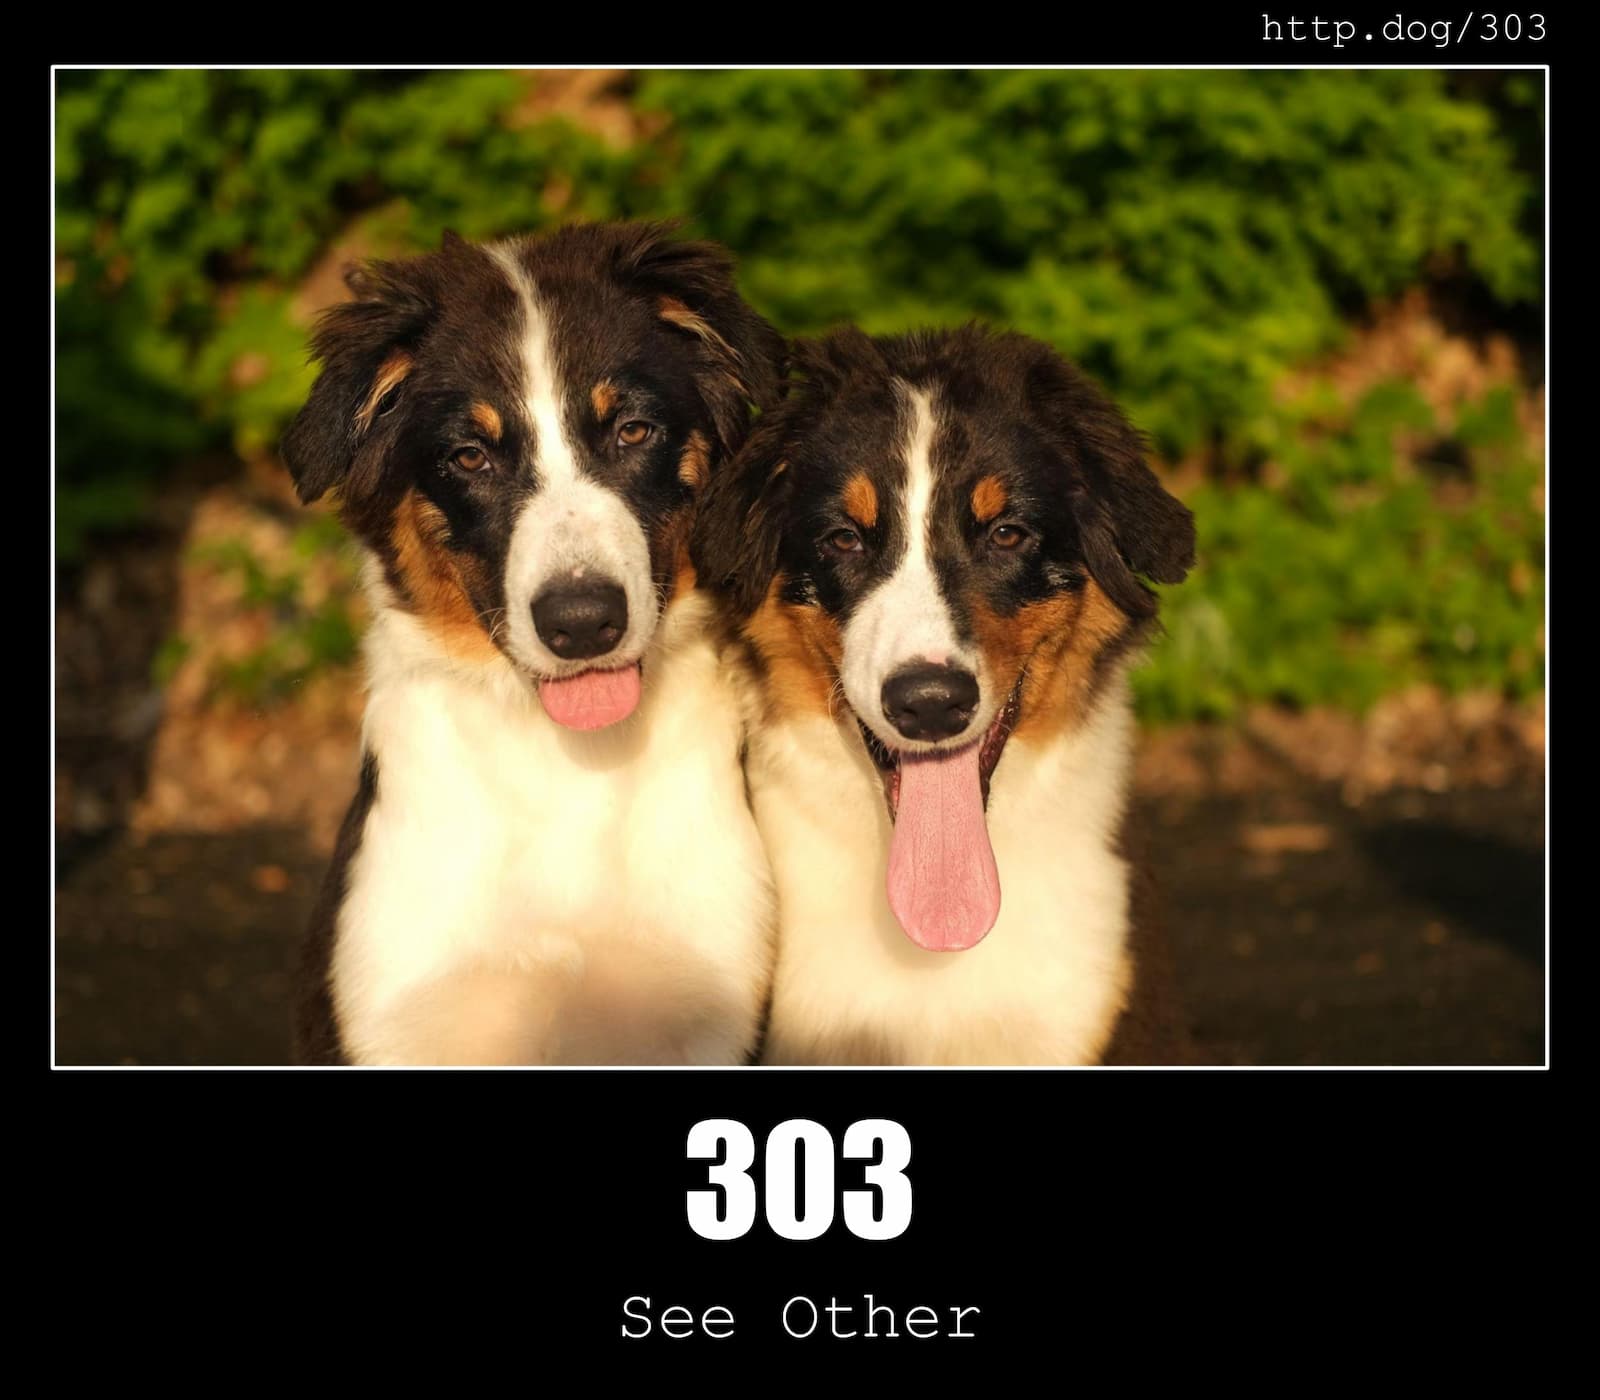 HTTP Status Code 303 See Other & Dogs